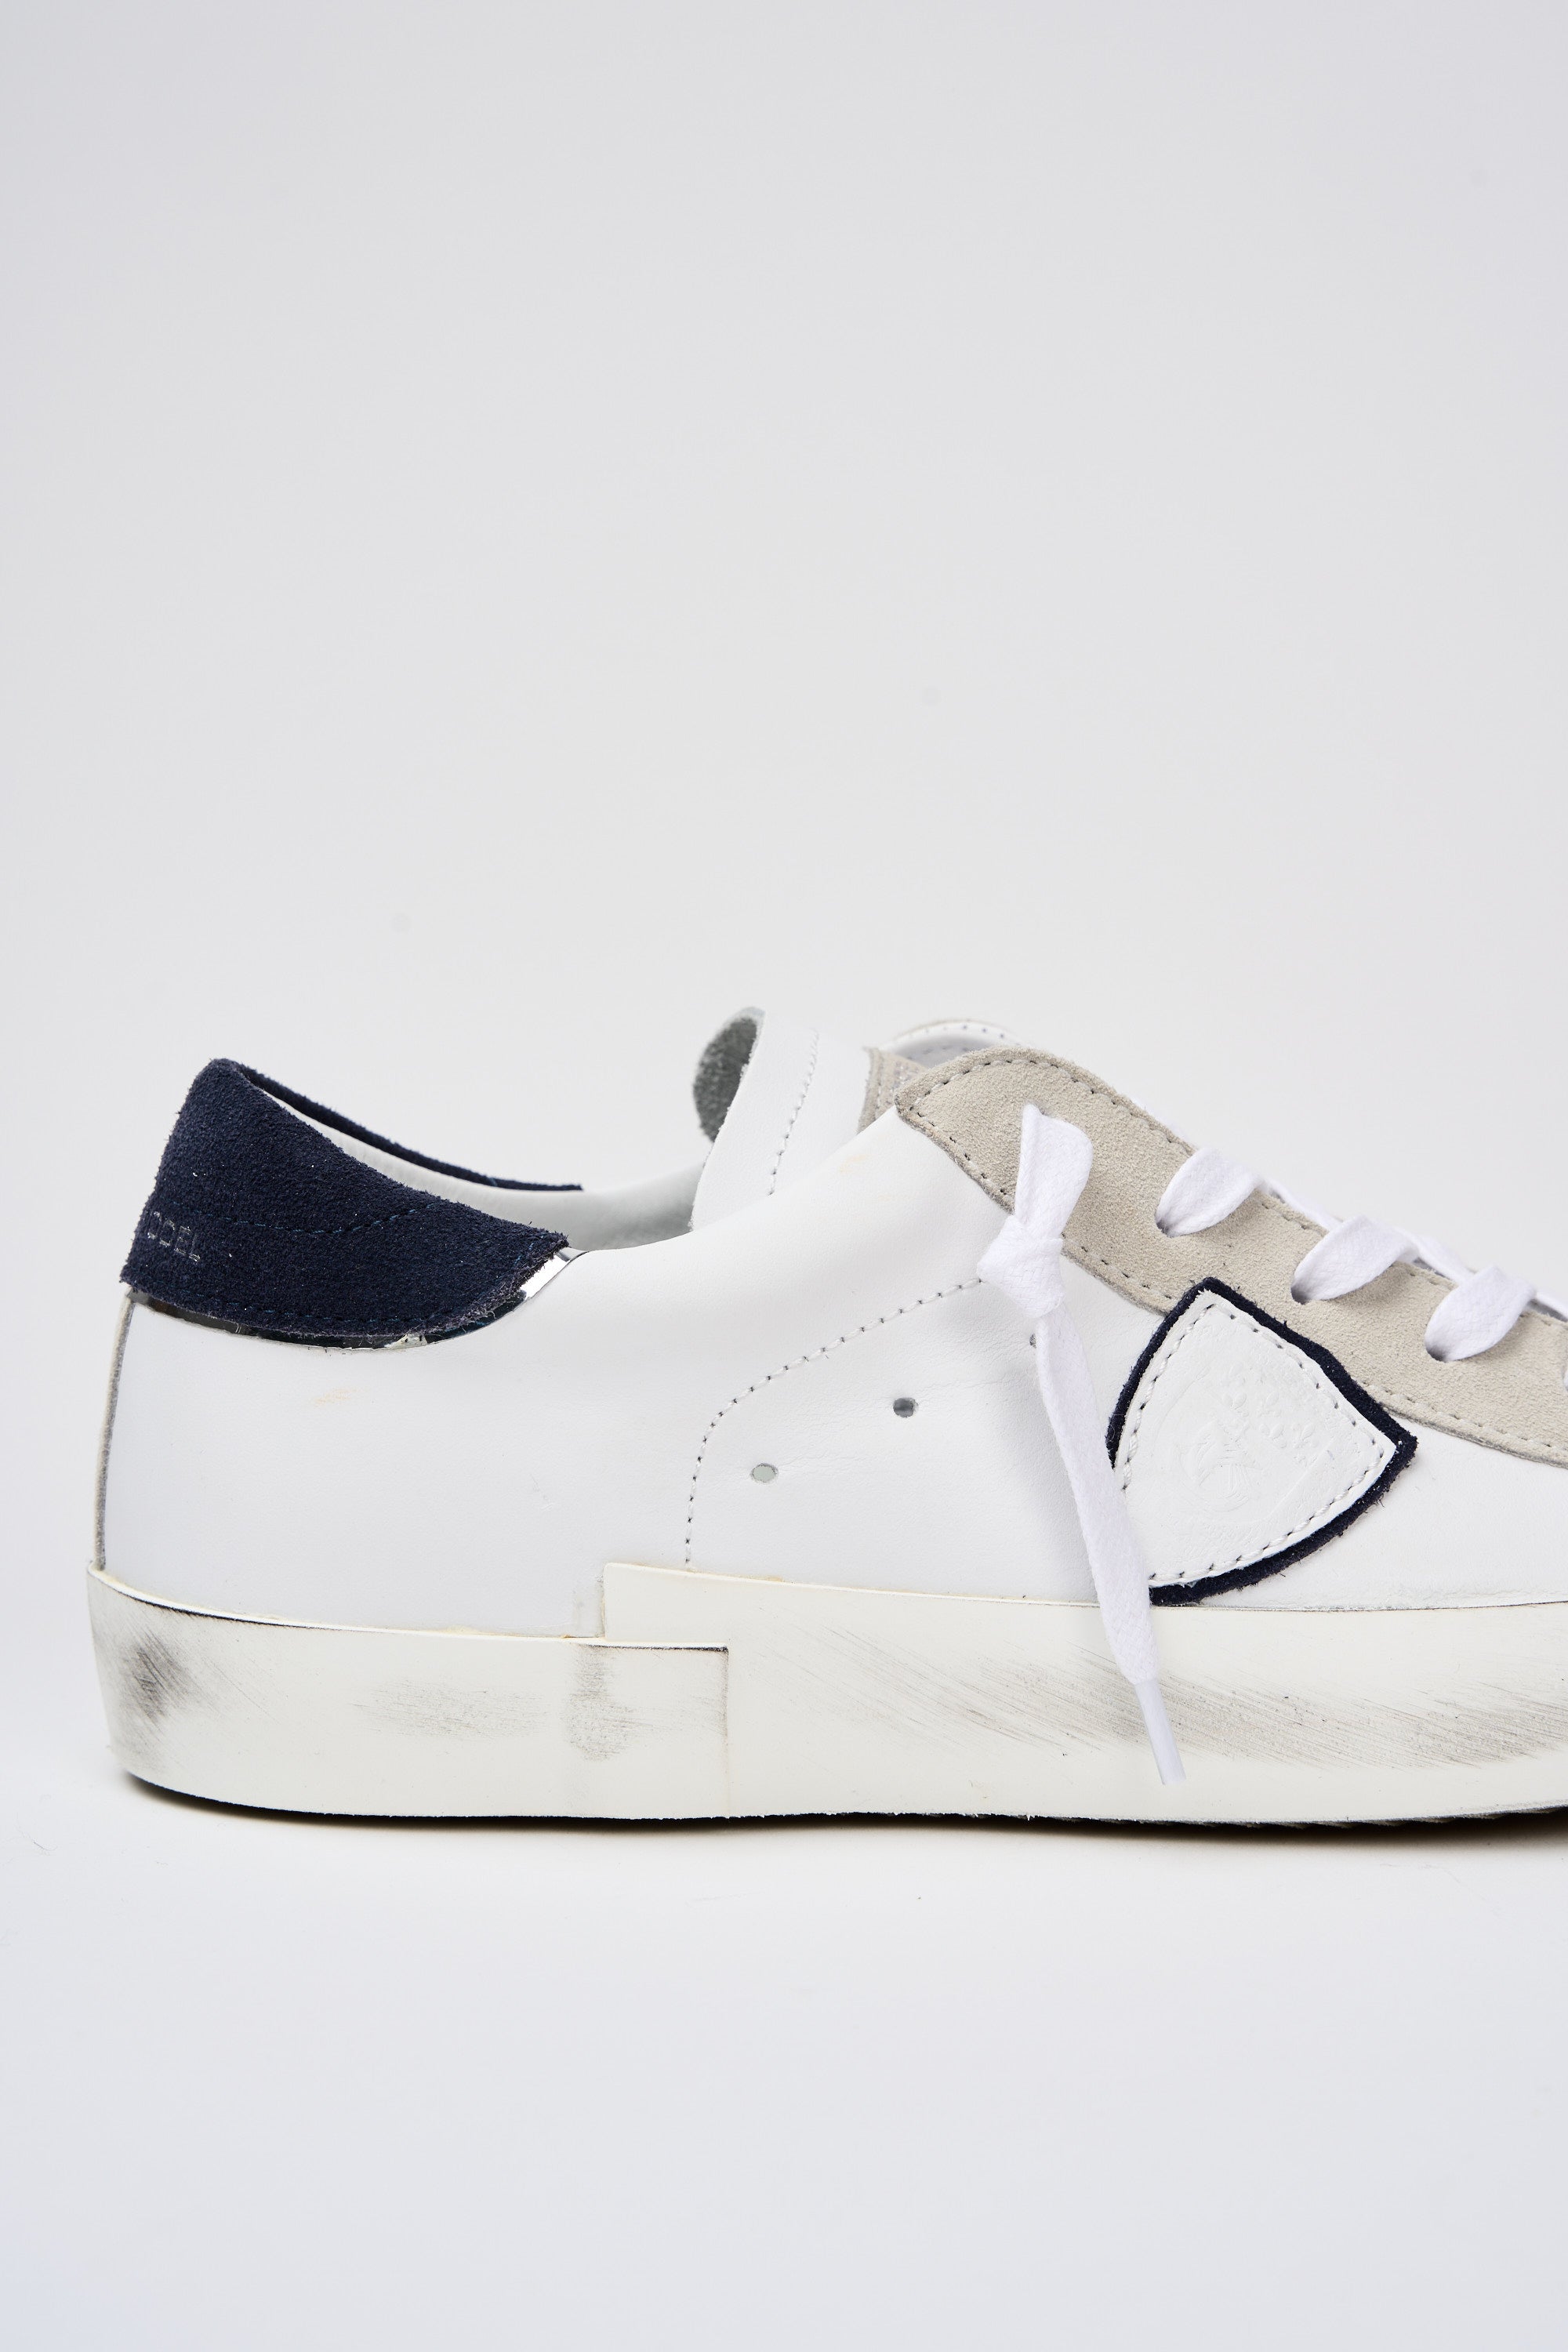 Philippe Model Sneaker PRSX Leather/Suede White/Blue-5